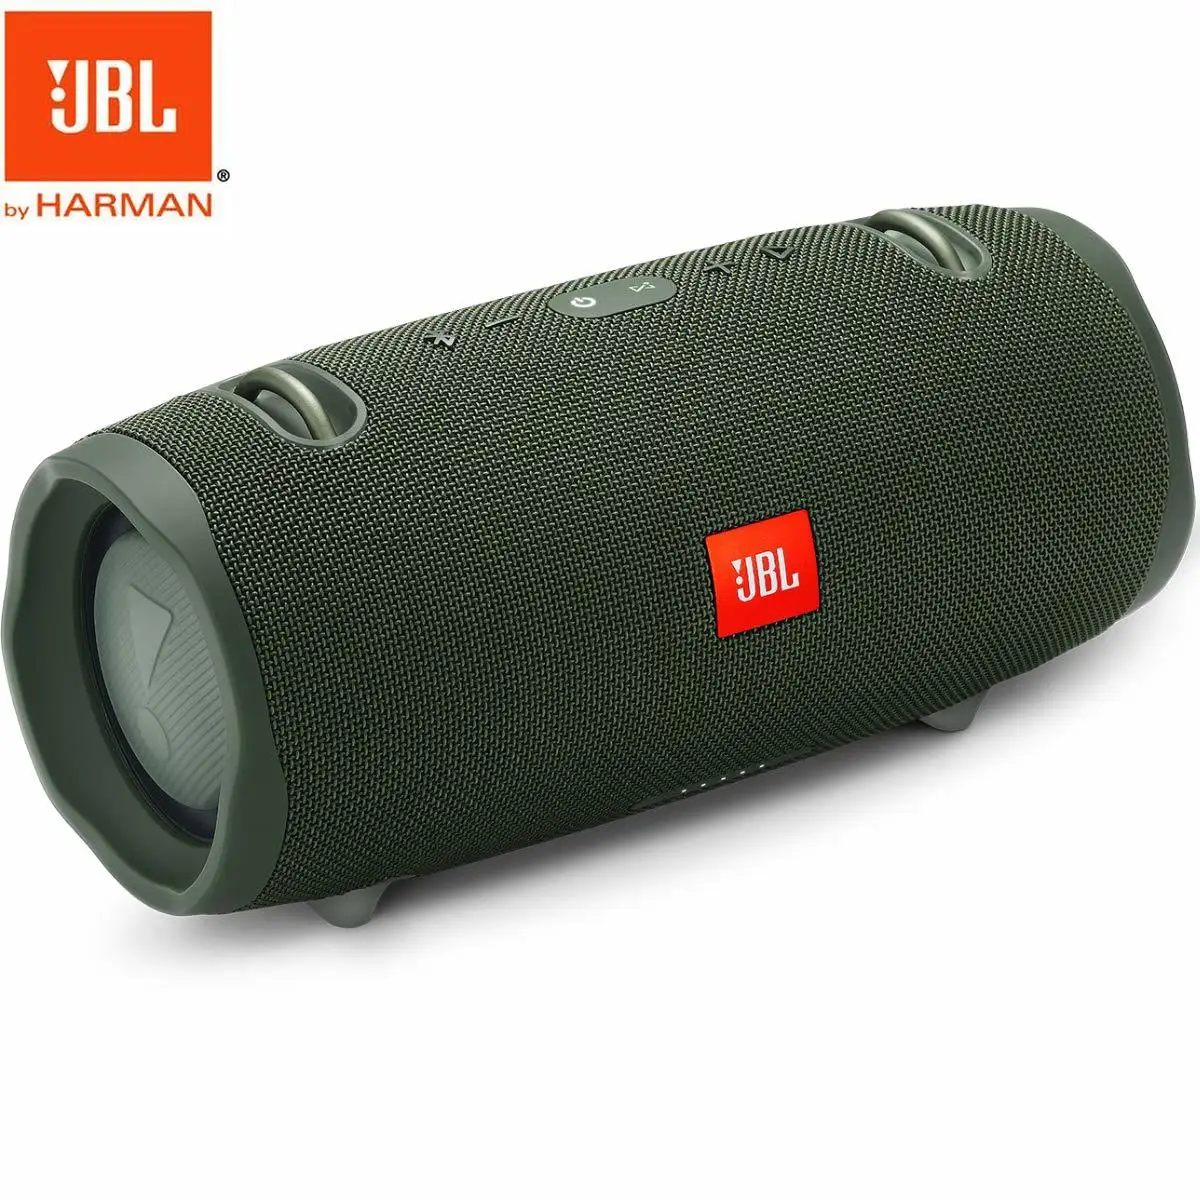 

JBL Xtreme 2 Wireless Bluetooth Speaker IPX7 Caixa Som Jbl Altavoz Loudspeakers Stereo Bass Speakers with Mic For Phone Computer